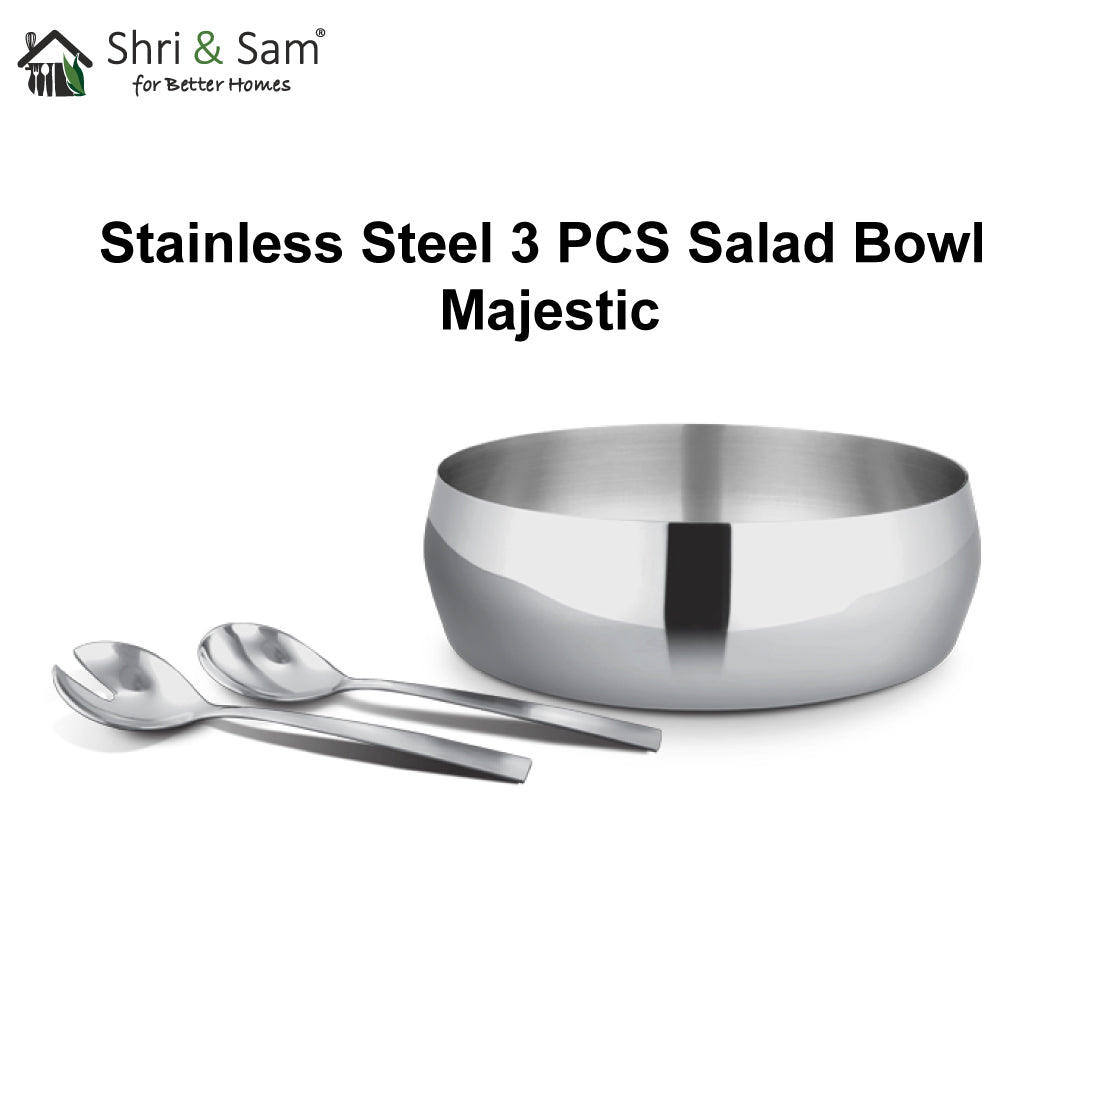 Stainless Steel 3 PCS Salad Bowl Majestic